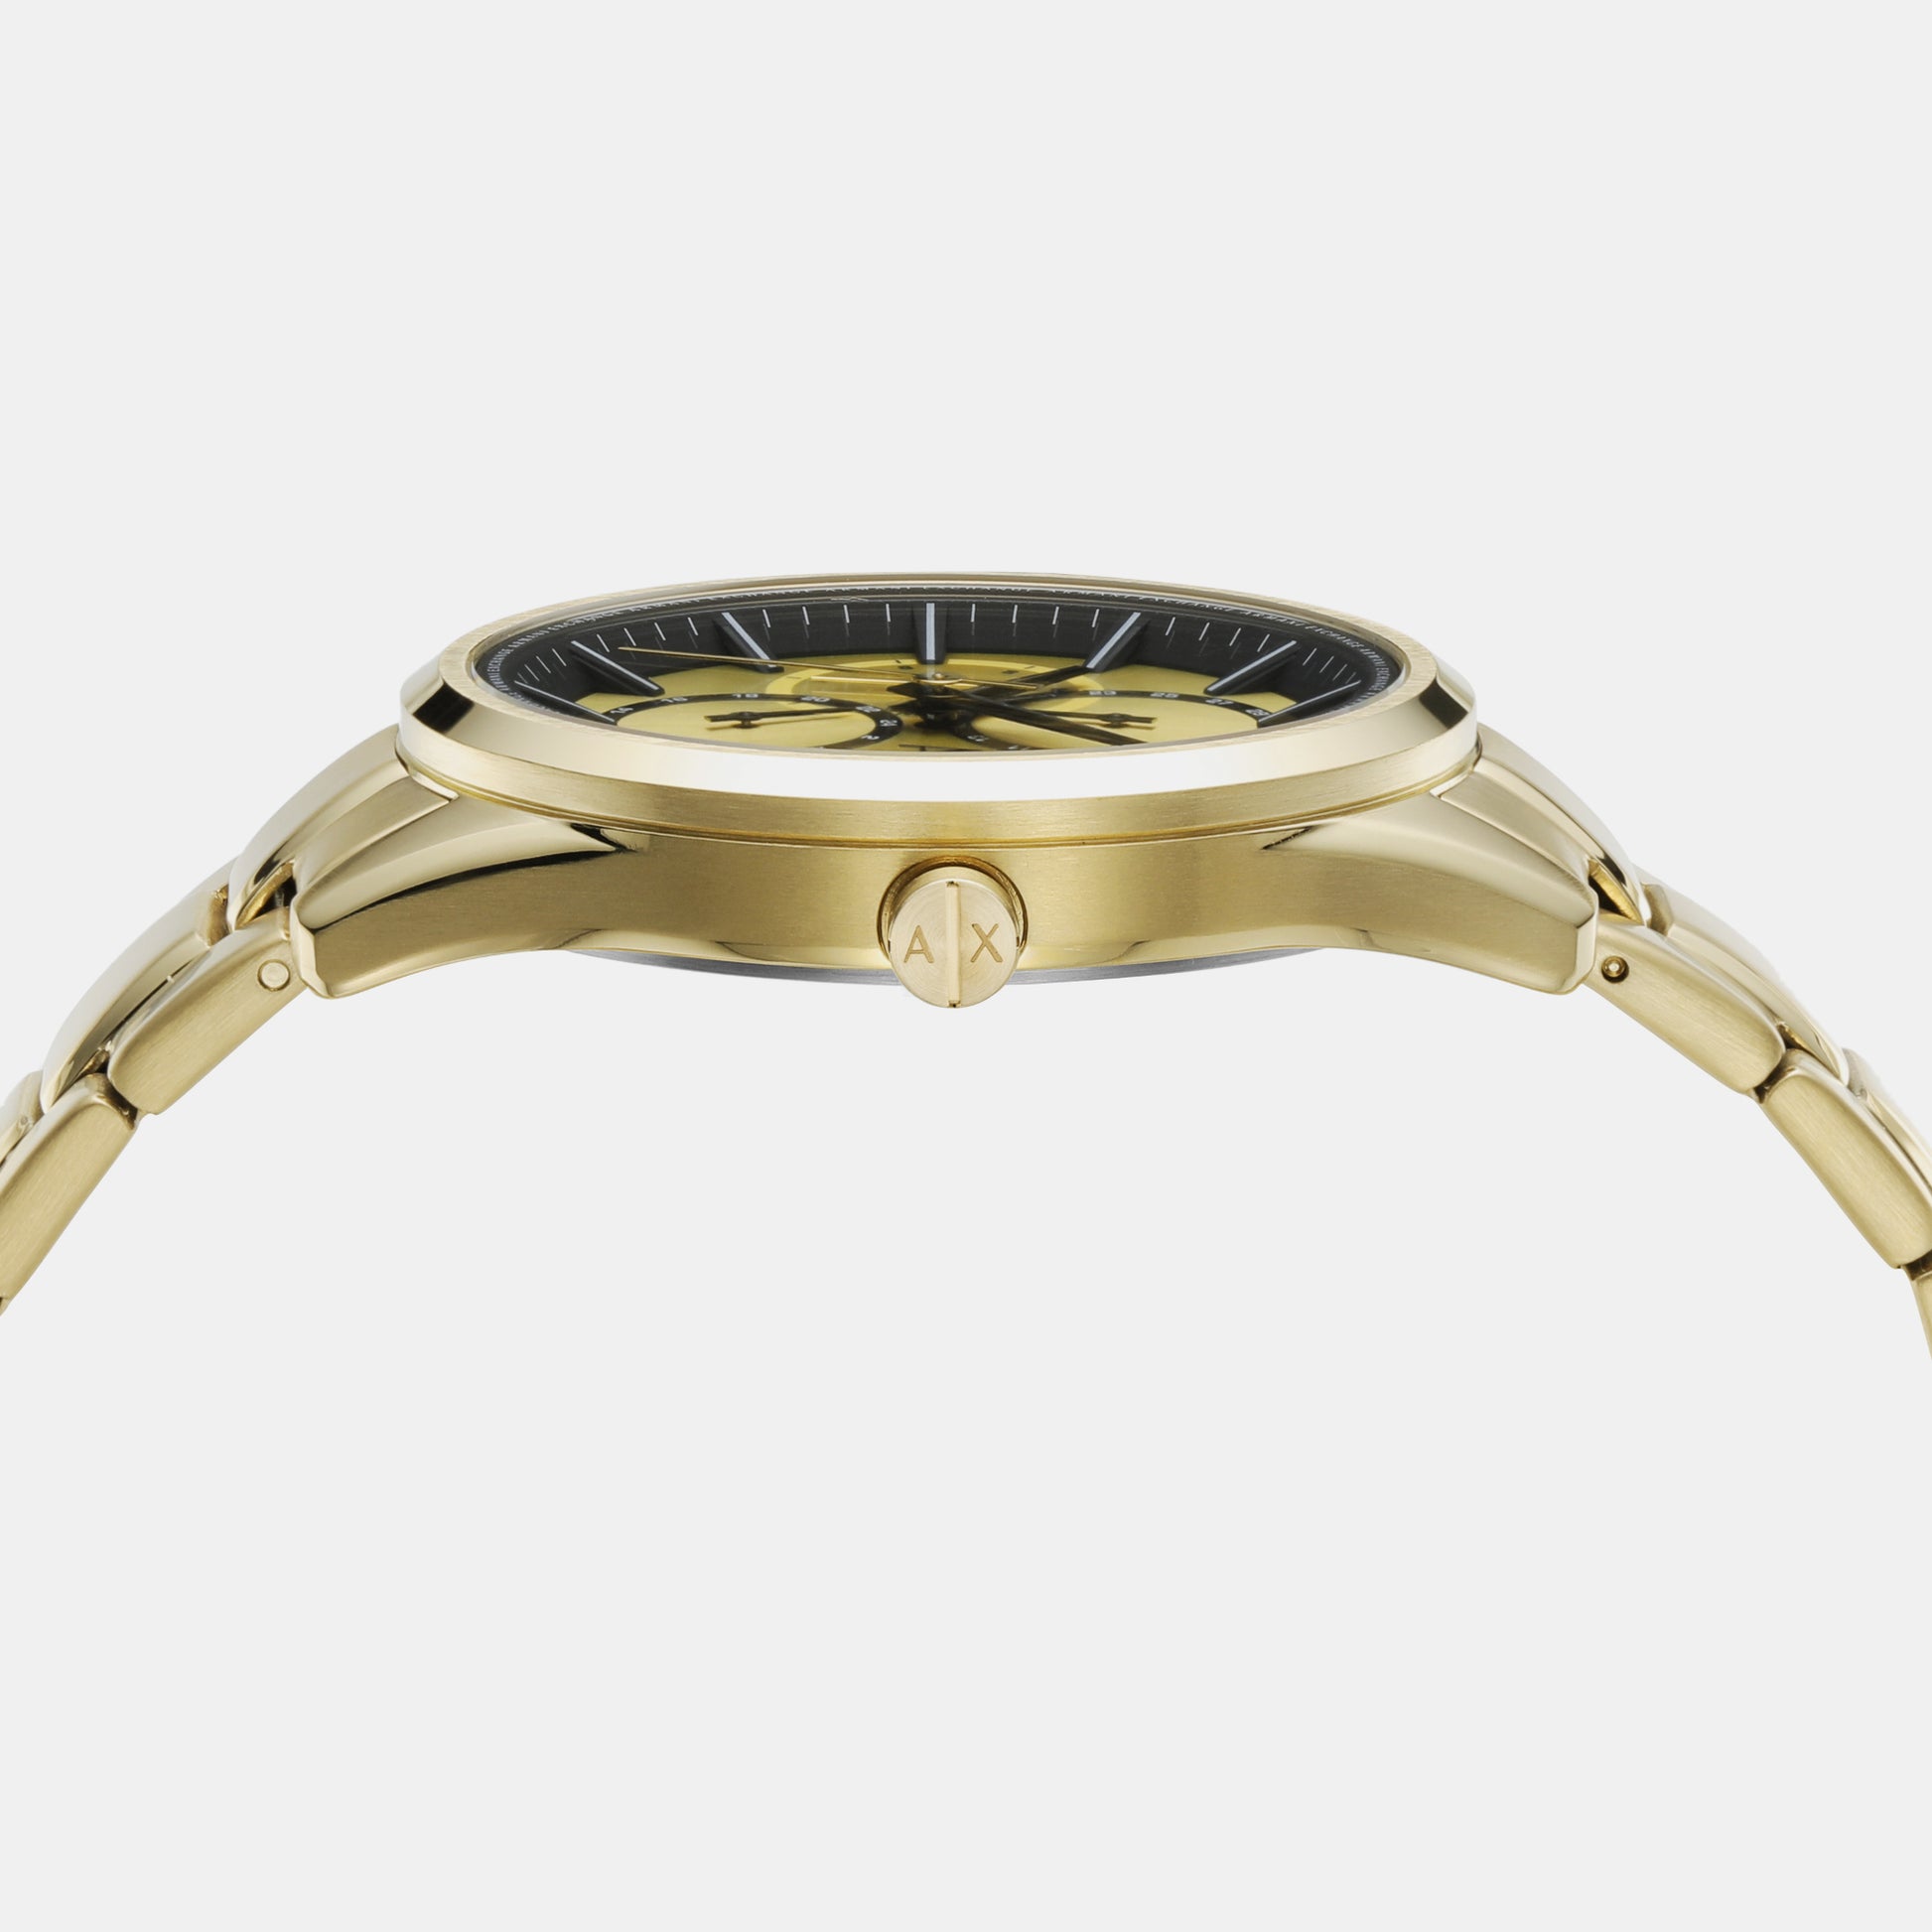 Male Gold Chronograph Stainless Steel Just – AX1866 Time Watch In